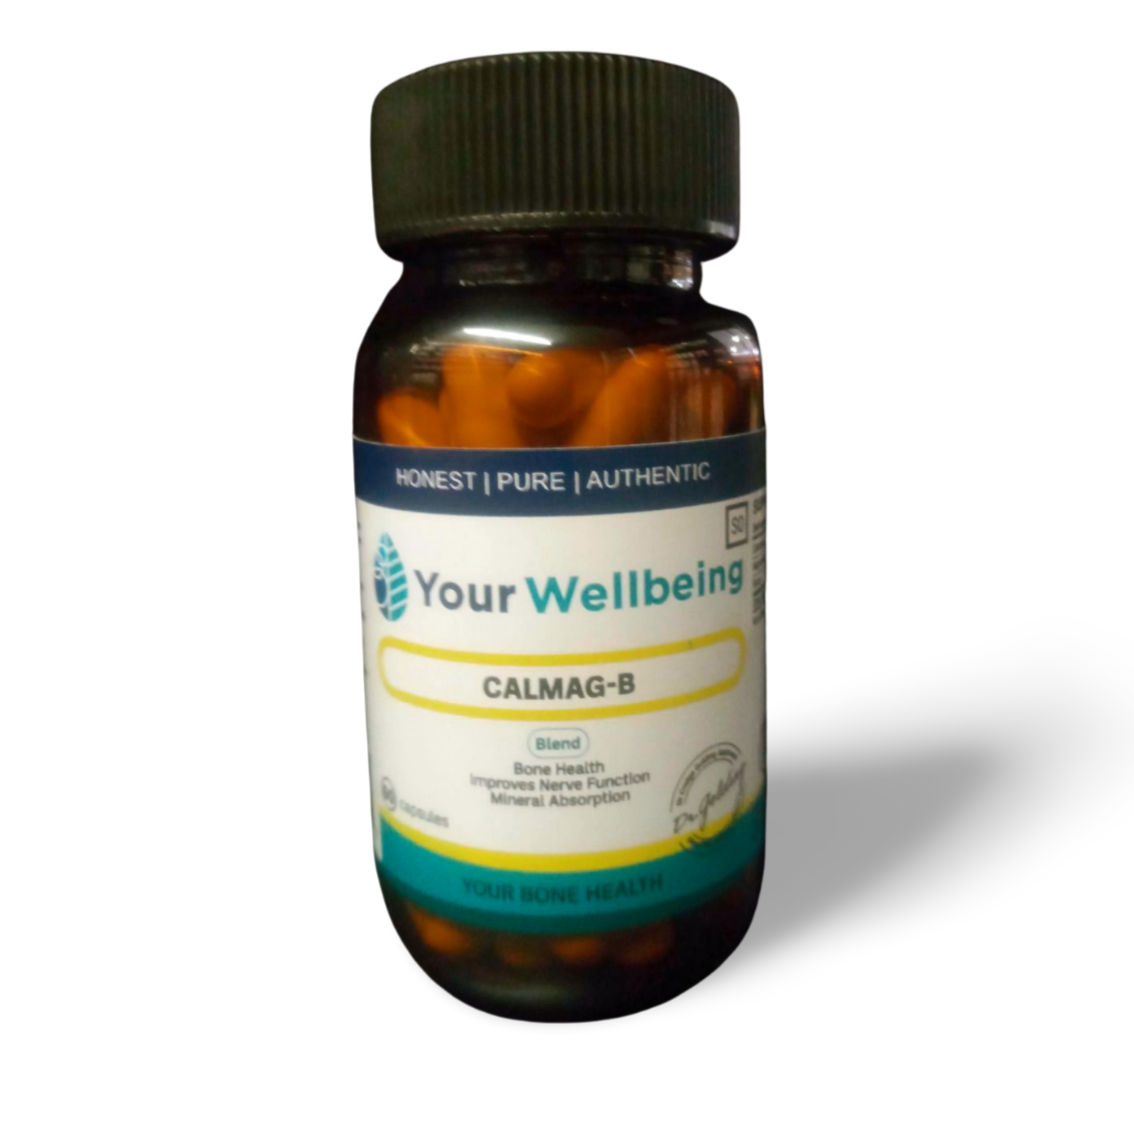 YOUR WELLBEING Calmag-B